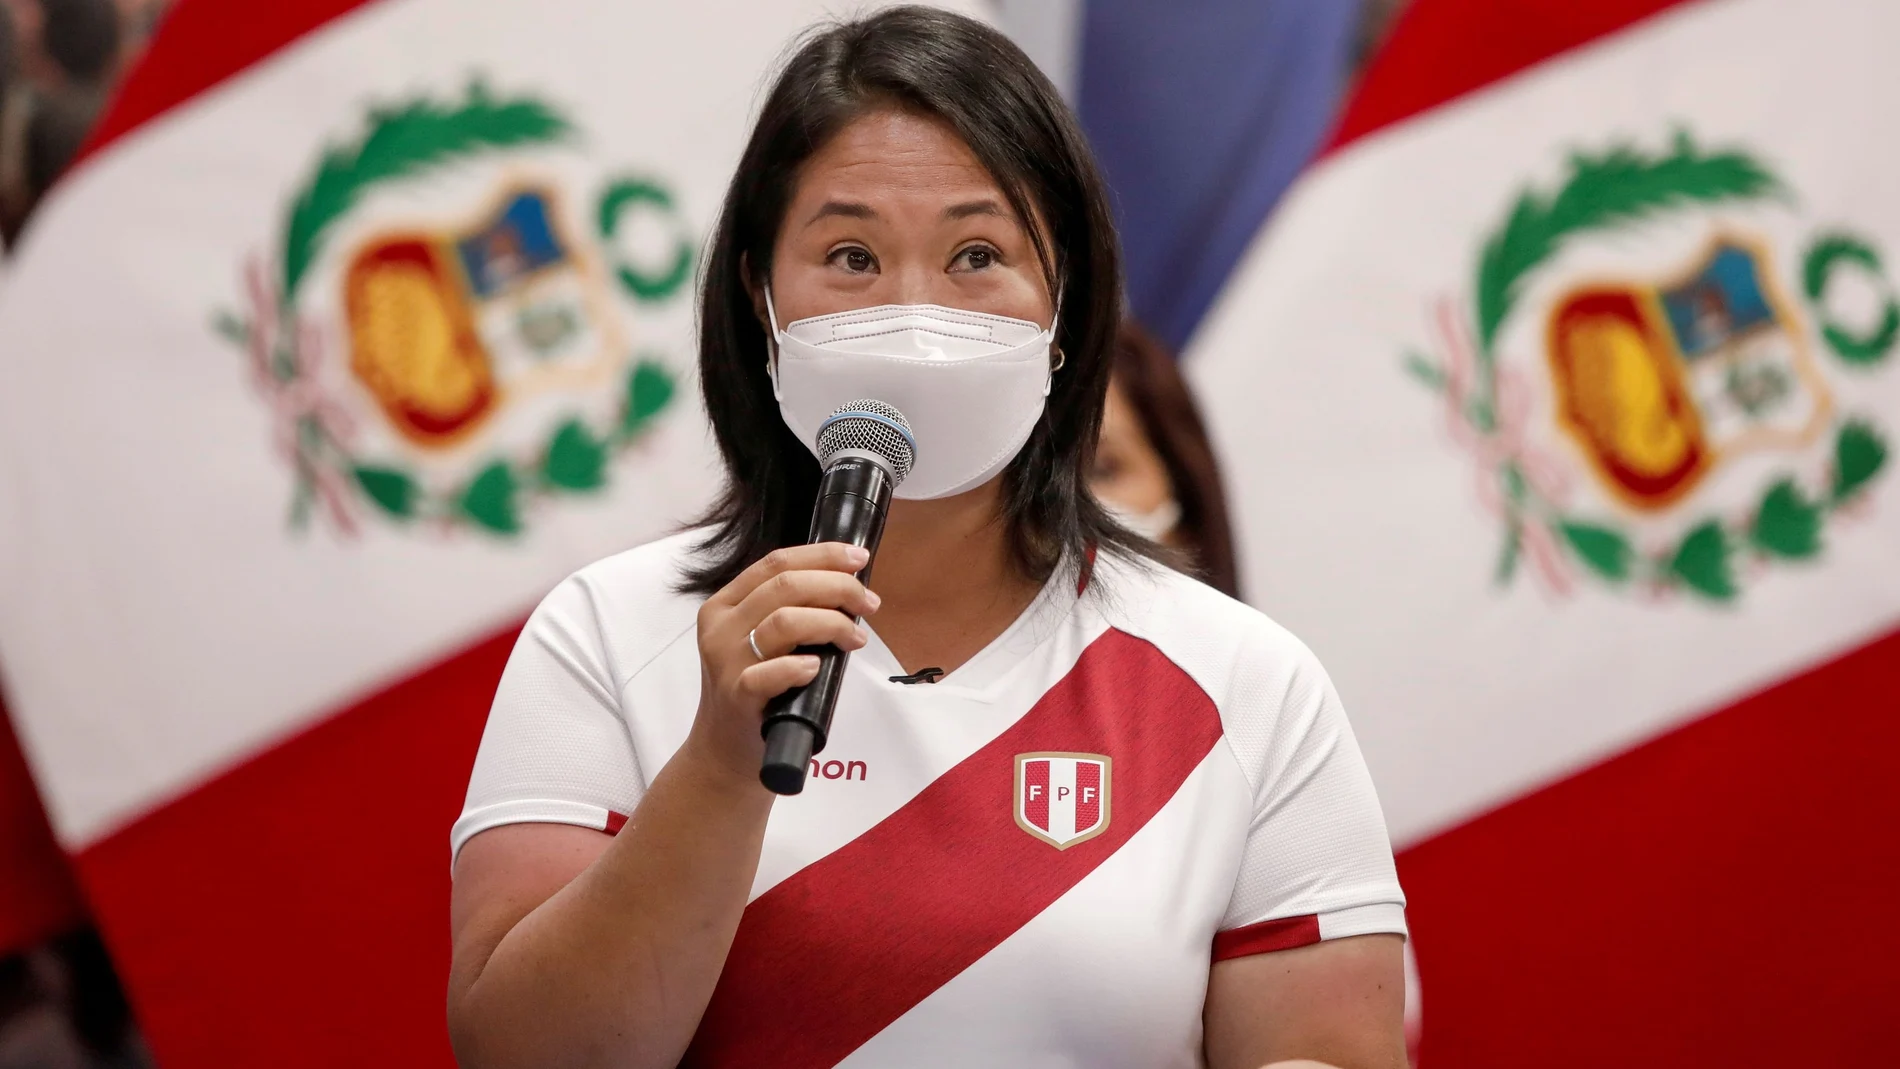 Peru's presidential right-wing candidate Keiko Fujimori, who will face opponent socialist candidate Pedro Castillo in a run-off vote on June 6, addresses the media, in Lima, Peru May 8, 2021. REUTERS/Angela Ponce